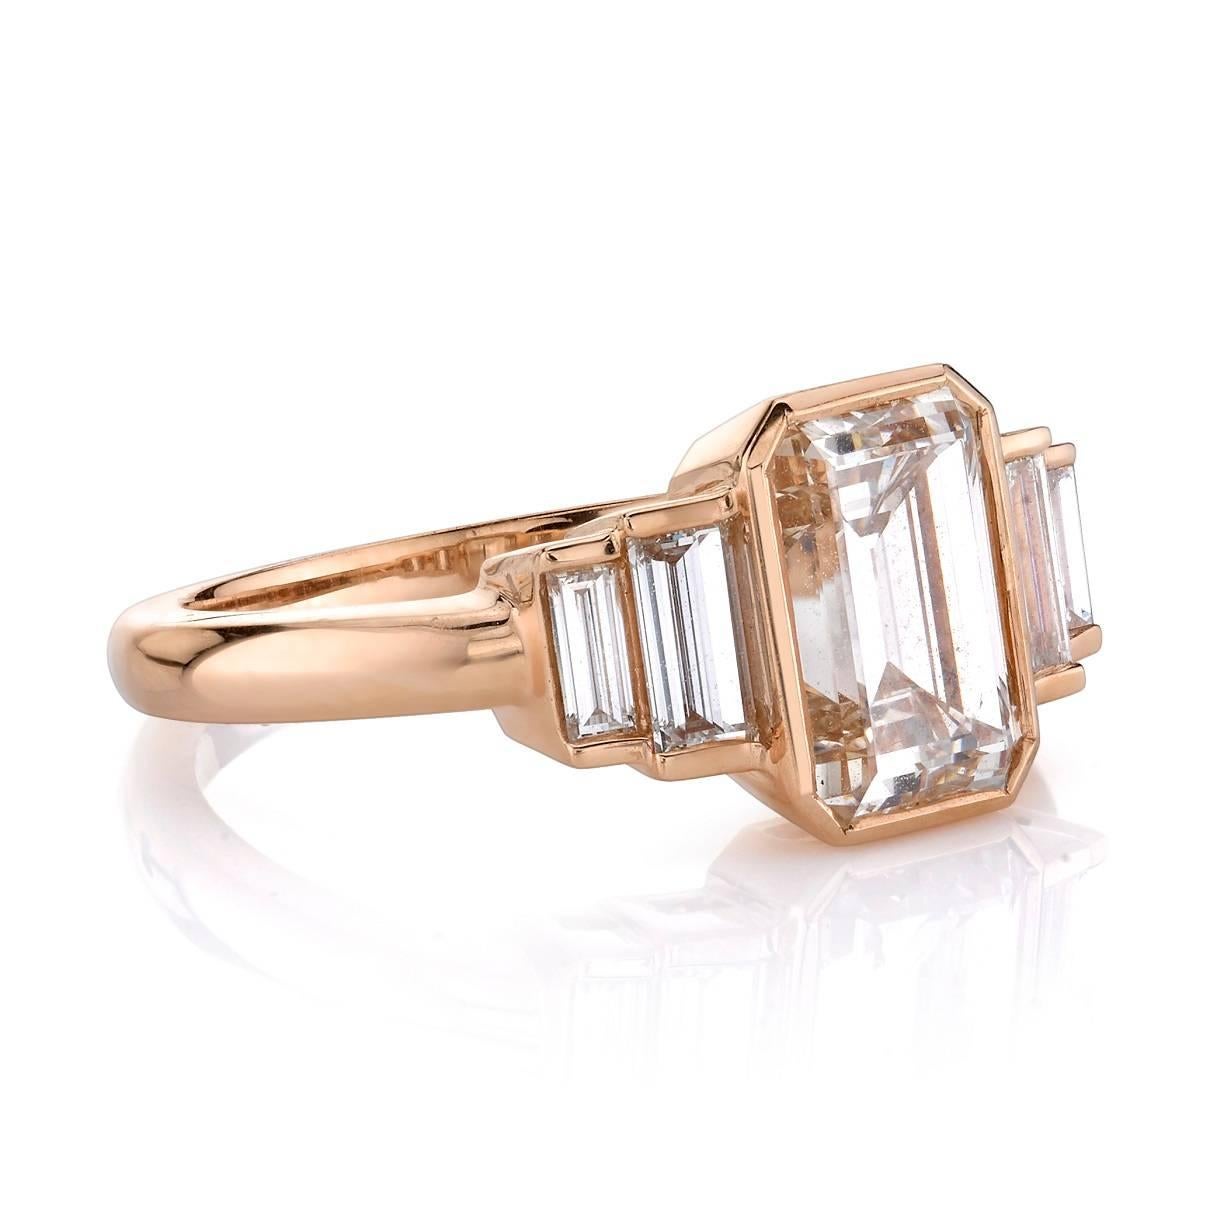 1.76ct K/VS2 Emerald cut diamond GIA certified and set in a handcrafted 18k rose gold mounting.  A classic and sleek design featuring bezel set diamonds and baguette accents.